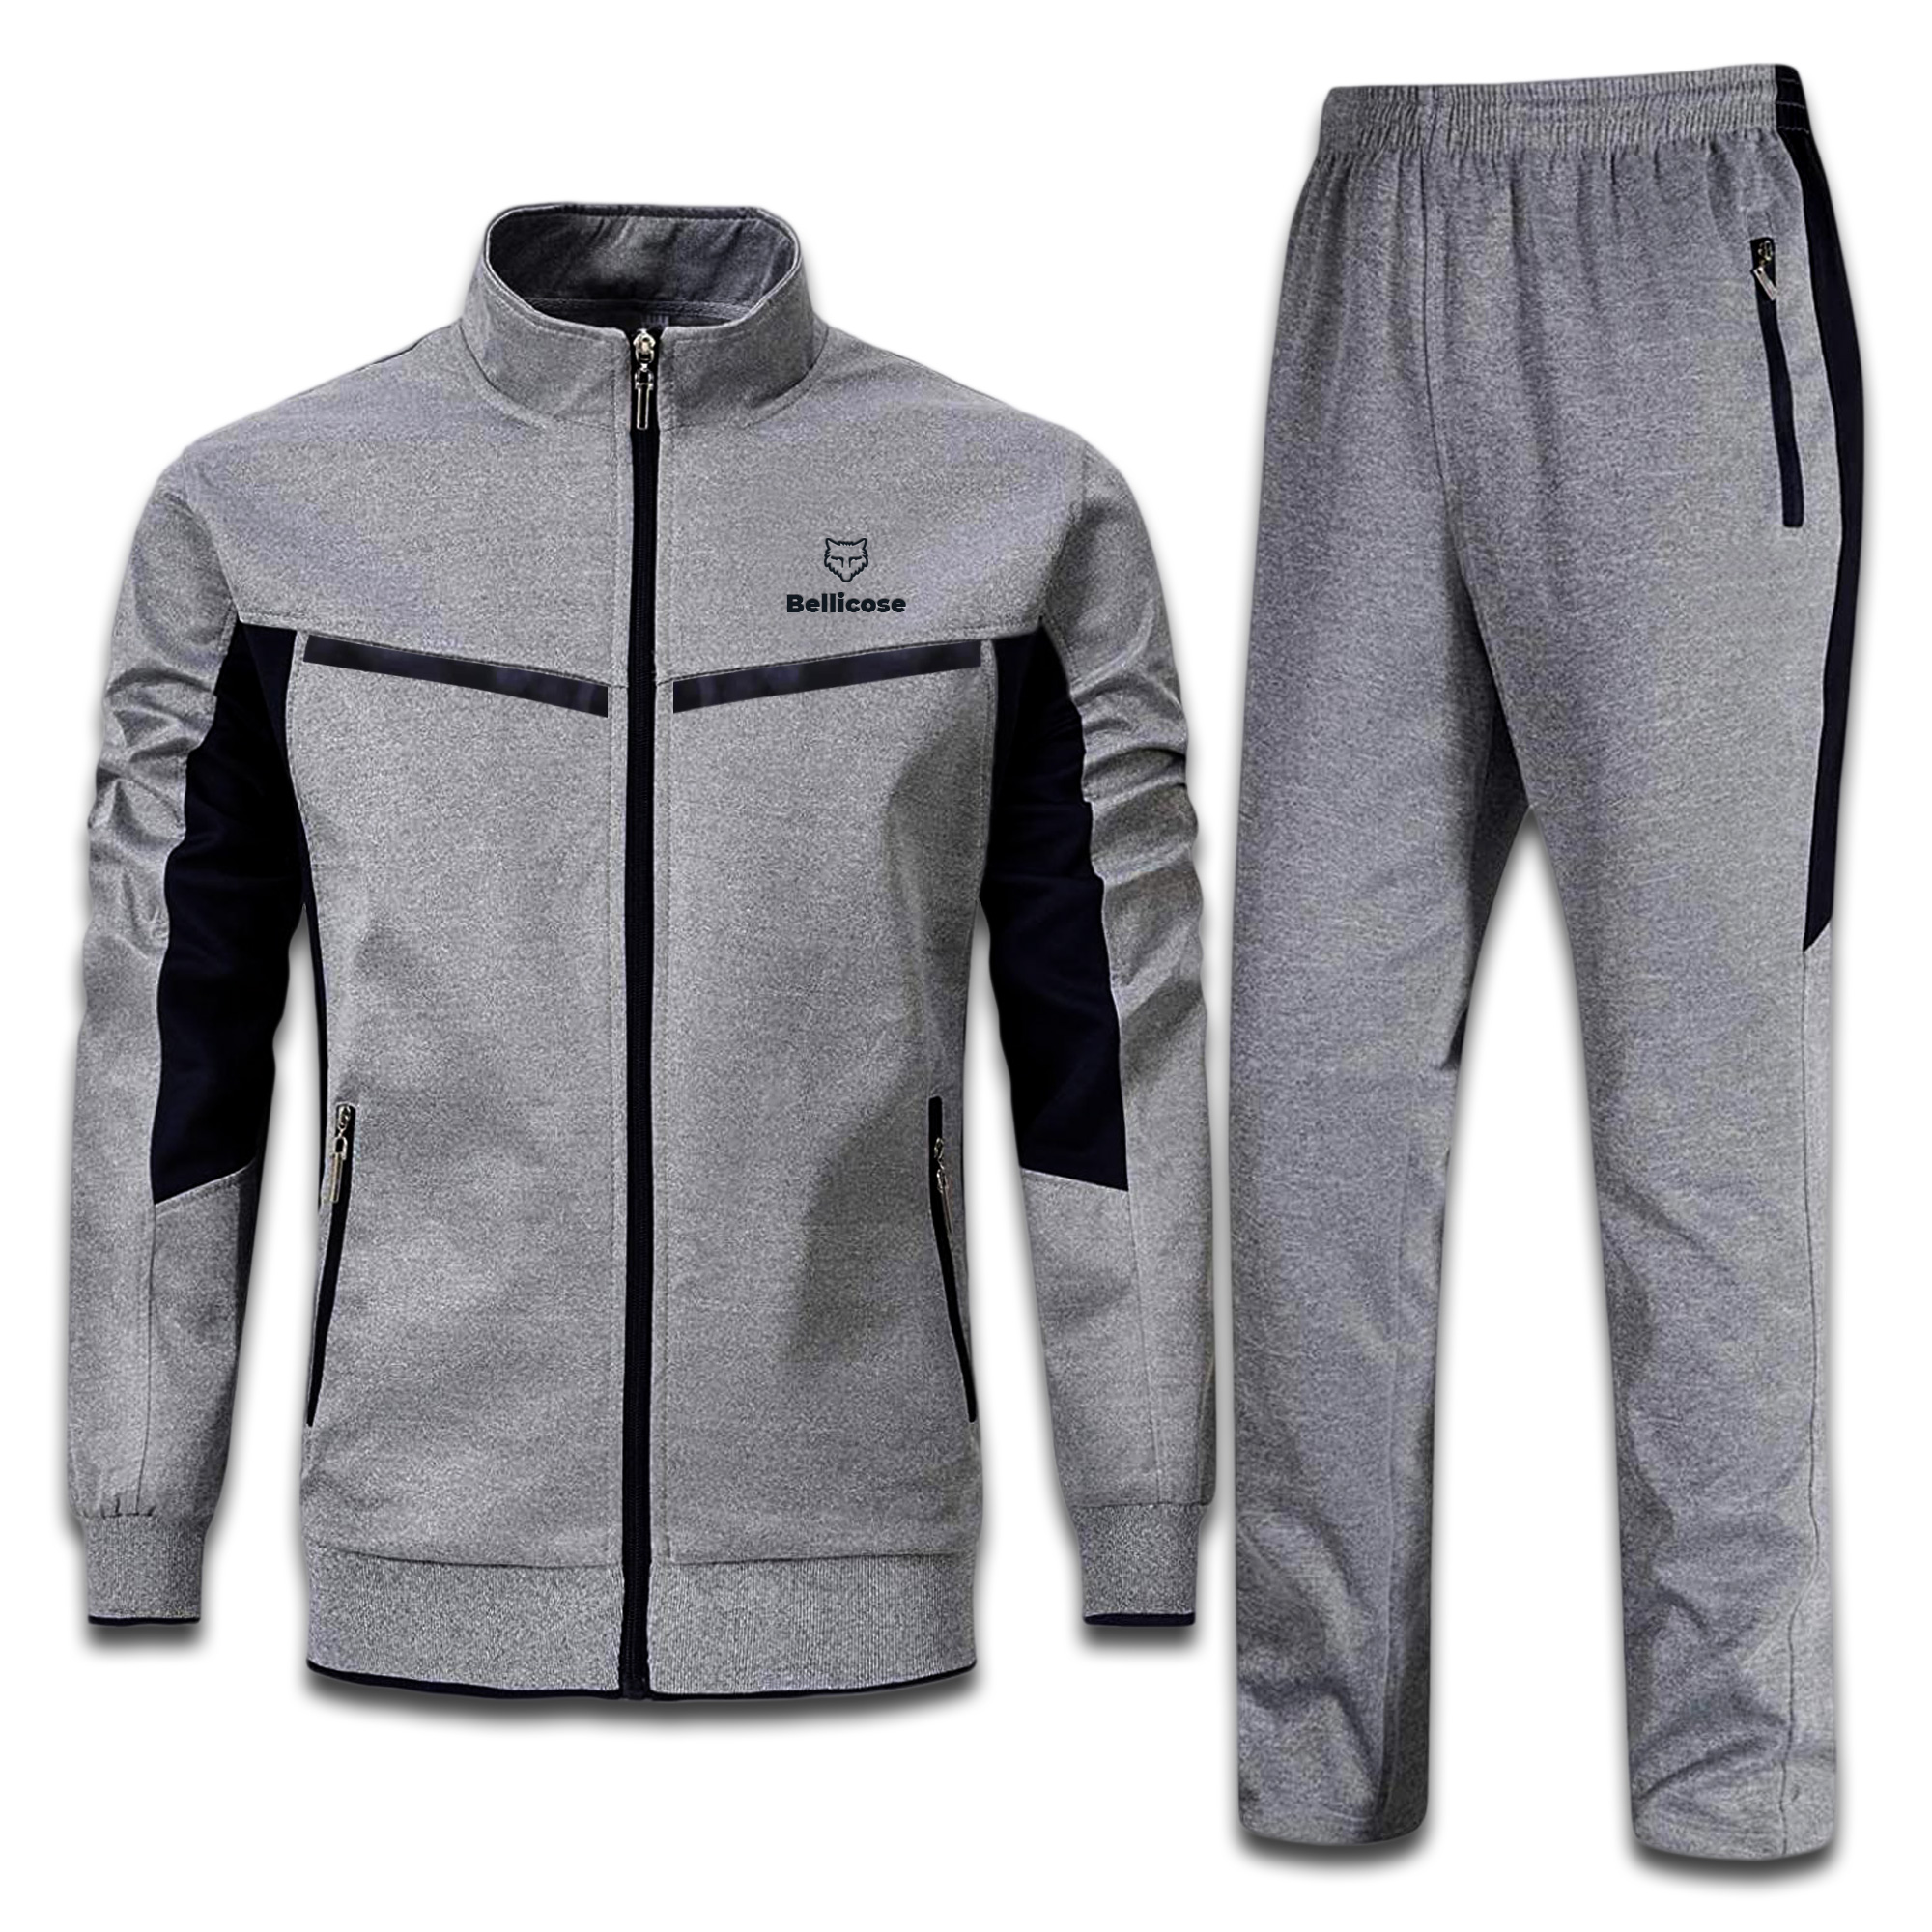 Mens Custom Sports Tracksuit for Boxing MMA Fitness Gym – The Bellicose ...